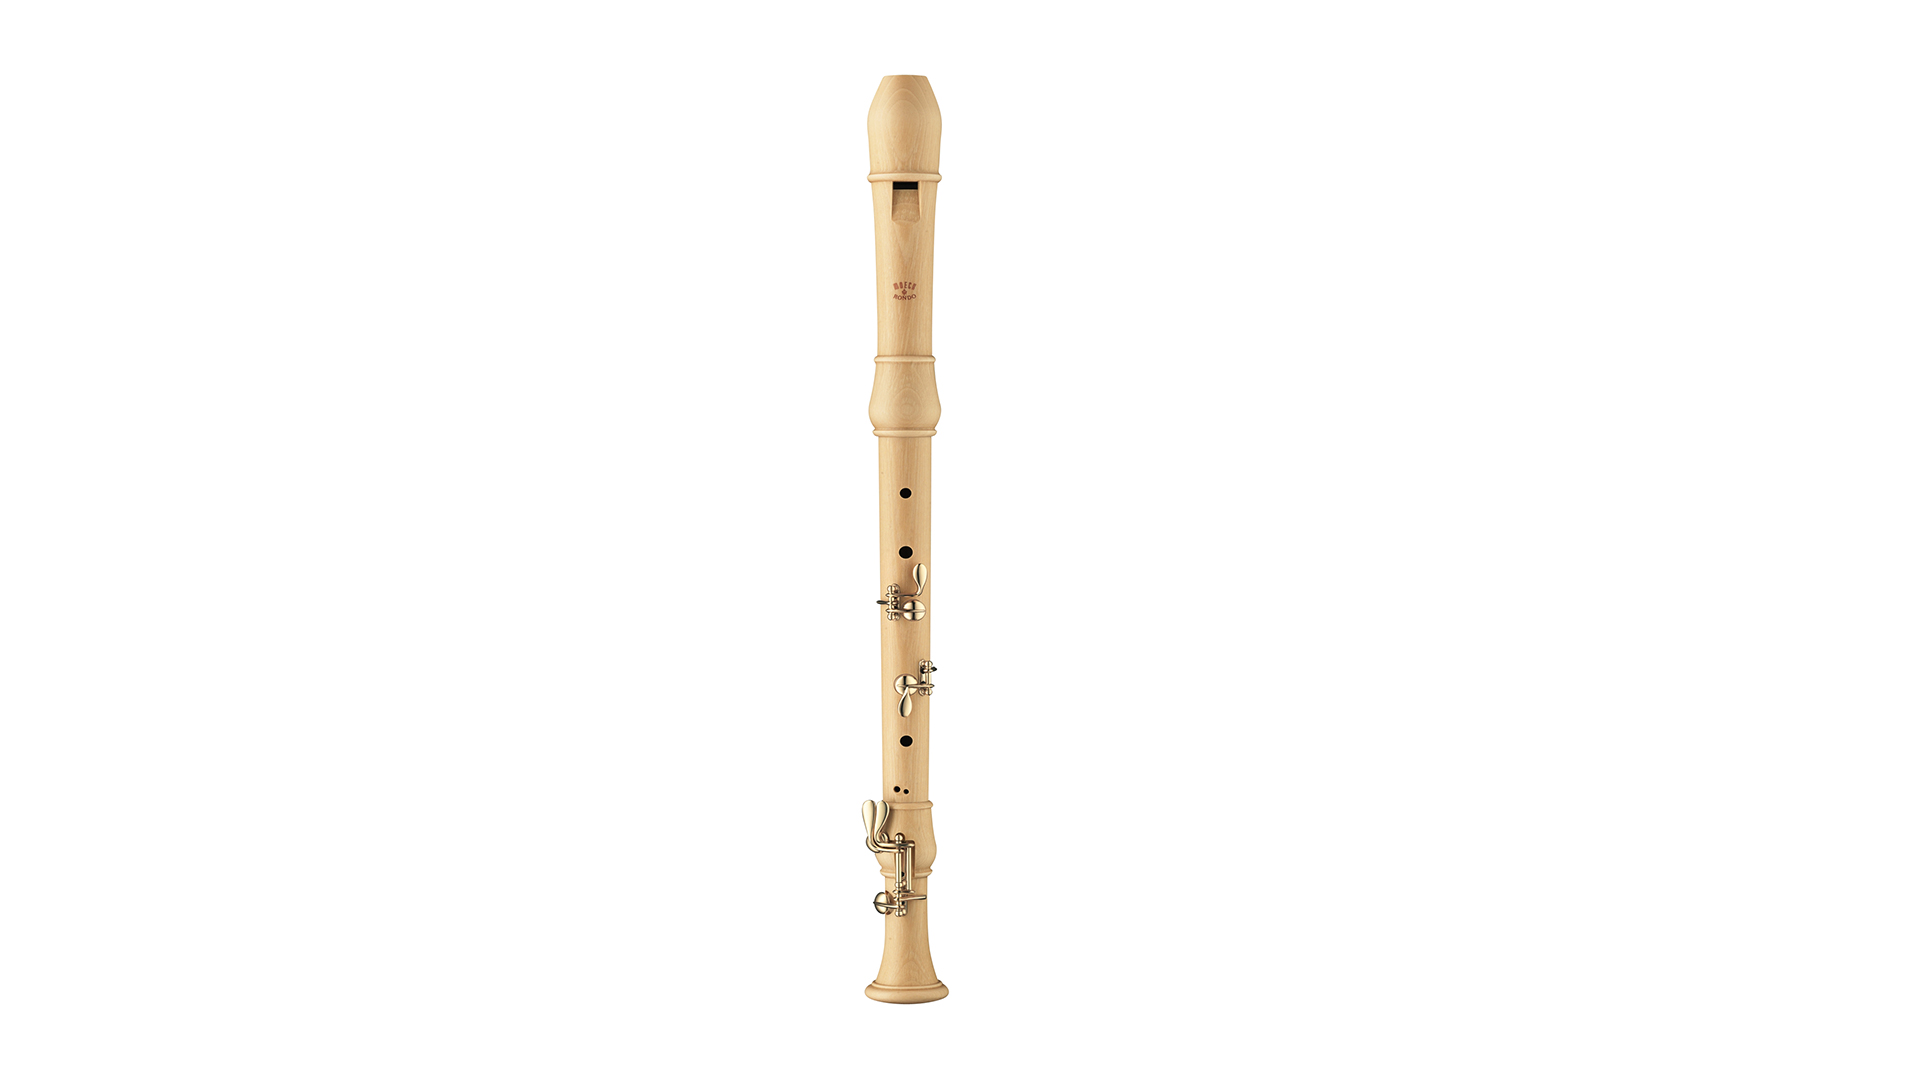 Moeck, "Flauto Rondo", Tenor Plus in c', baroque double hole, with double key and middle keys, maple